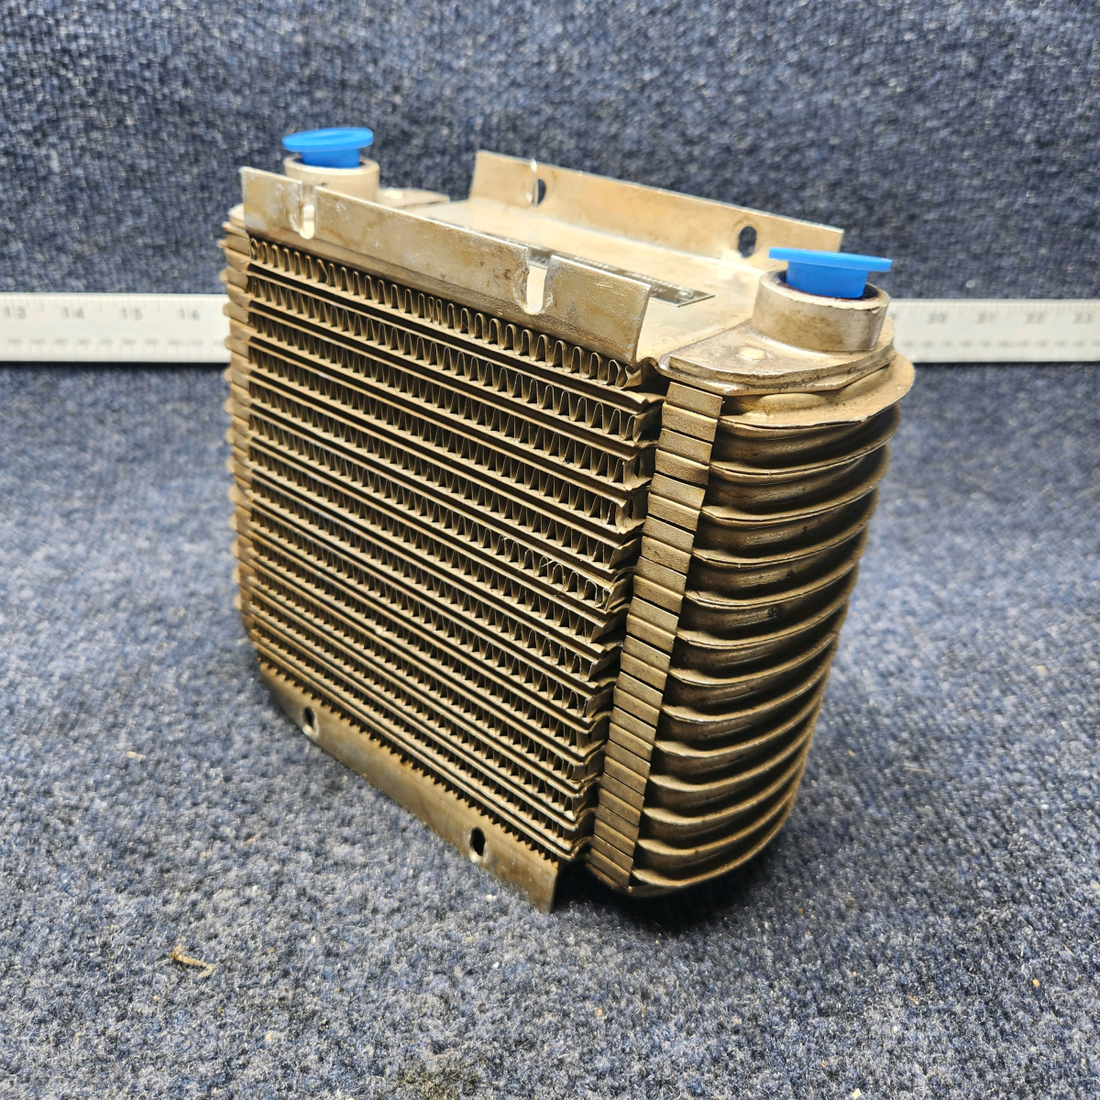 Used aircraft parts for sale, 8544108 Lycoming Textron OIL COOLER ASSEMBLY "SEE PHOTOS"